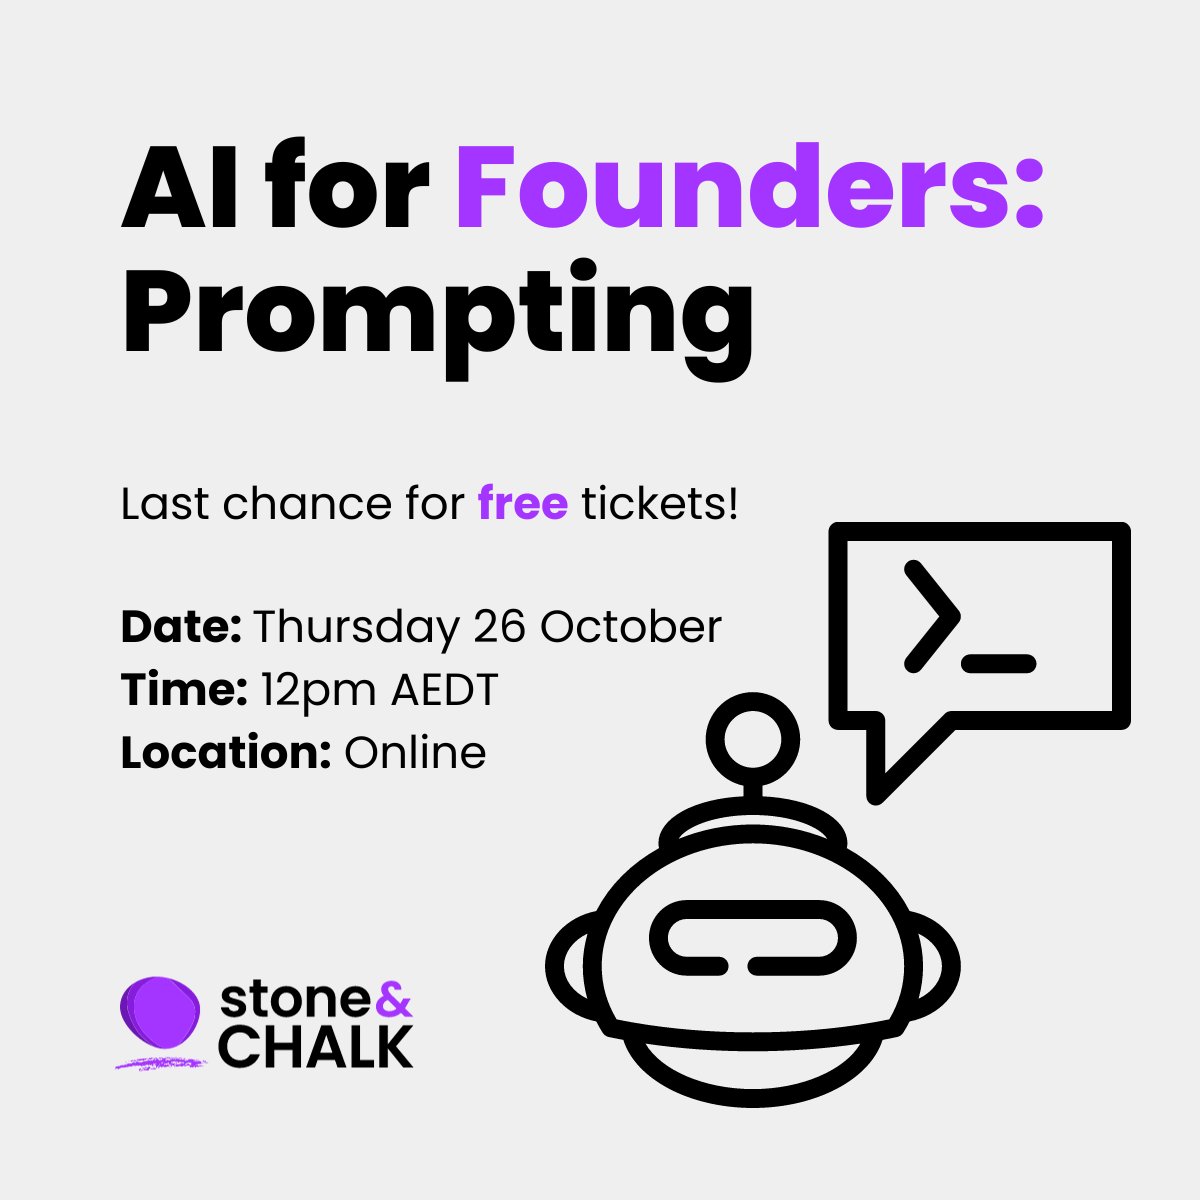 It's your last chance to secure free tickets to our AI for Founders session happening tomorrow at 12pm AEDT. Can't make it on the day? Everyone who registers will get a copy of the recording following the event. Secure your free ticket here: hubs.ly/Q026Gz_P0